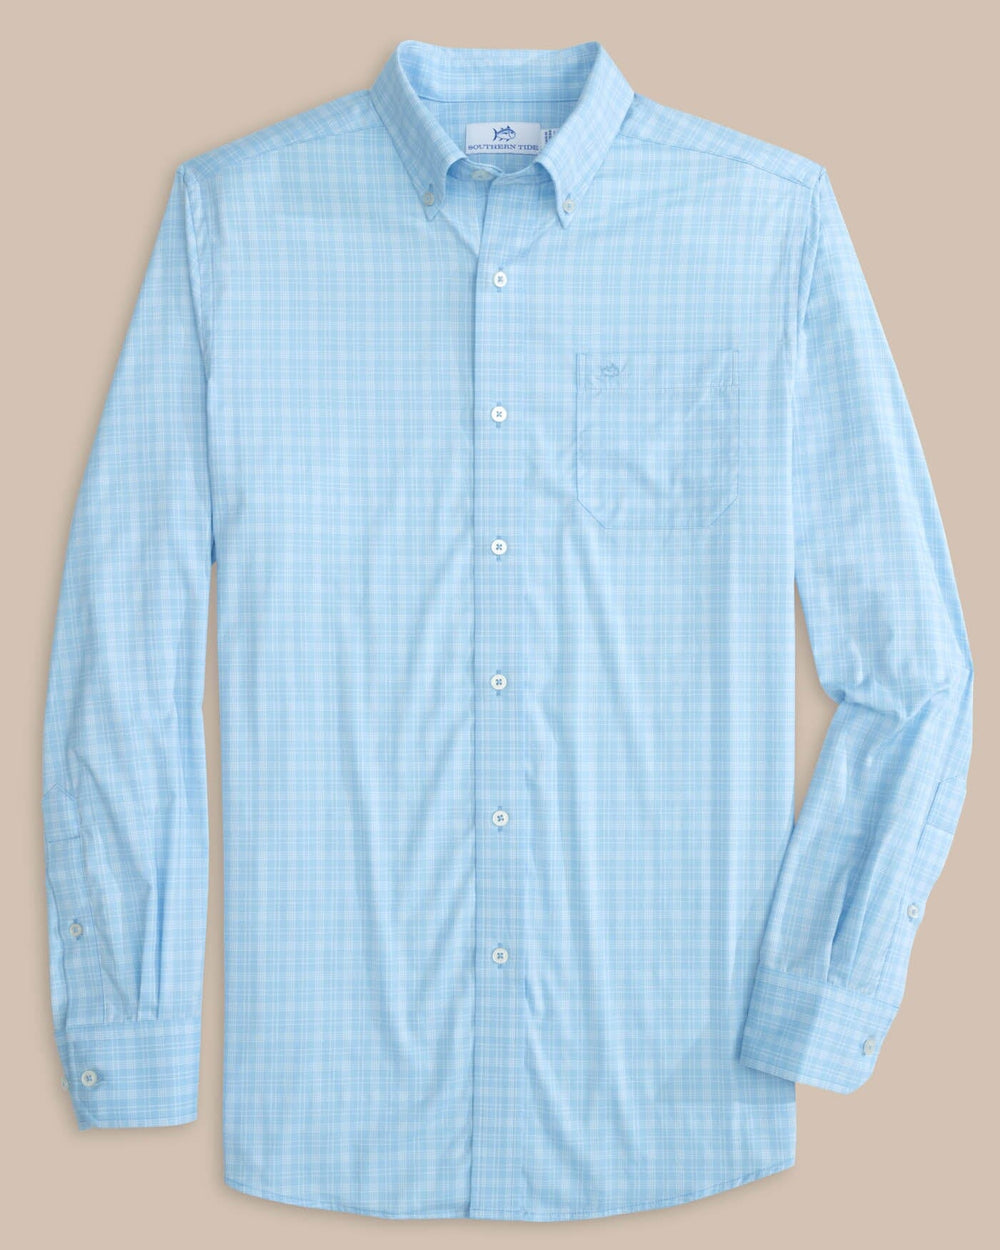 The front view of the Southern Tide brrr Intercoastal Pettigru Plaid Long Sleeve SportShirt by Southern Tide - Clearwater Blue